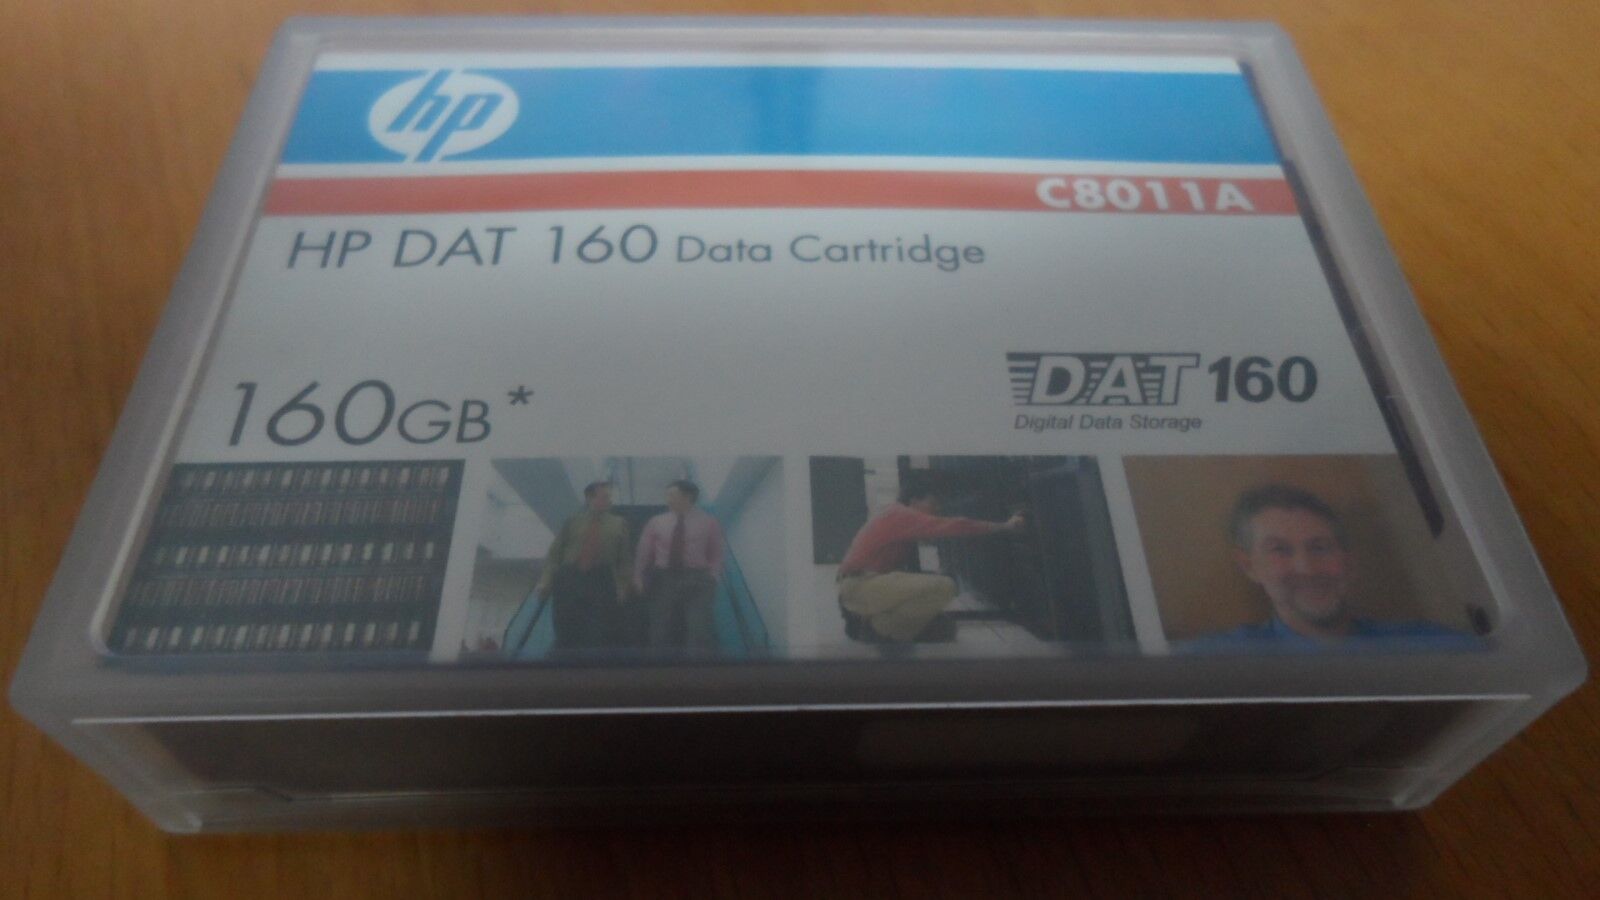 RE-CERTIFIED HP Data Cartridge DAT160 DDS6 Exact Part Number C8011A C8011-60000